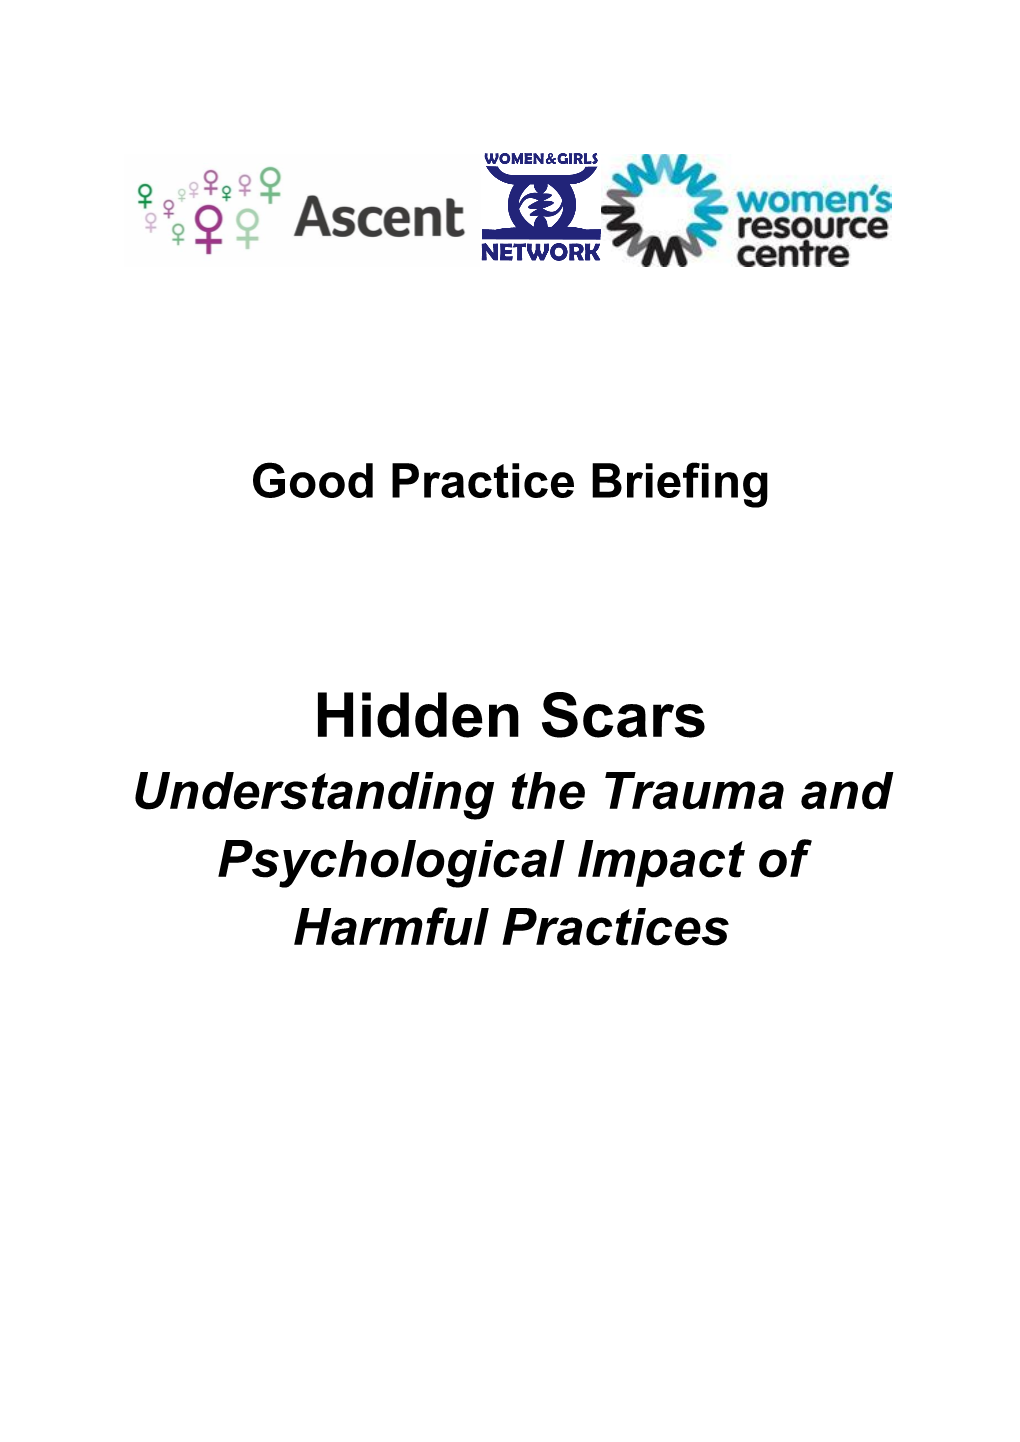 Hidden Scars Understanding the Trauma and Psychological Impact of Harmful Practices